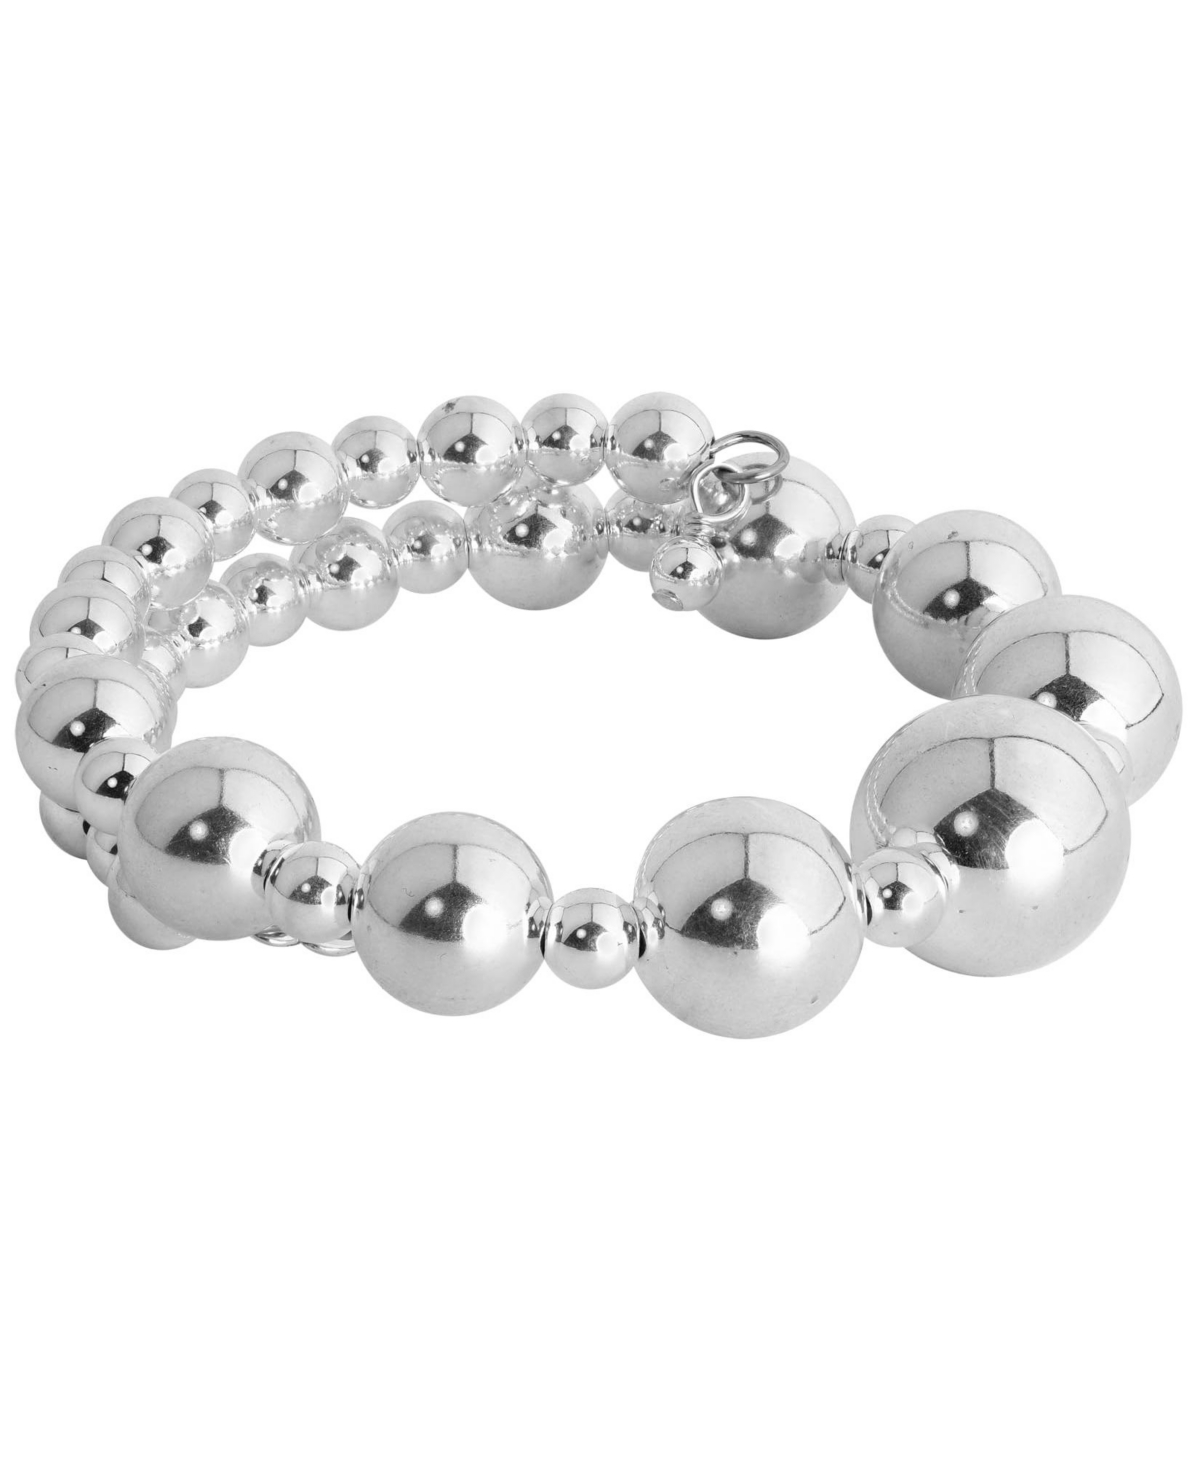 Classics Sterling Silver Beaded Coil Bracelet - Sterling silver